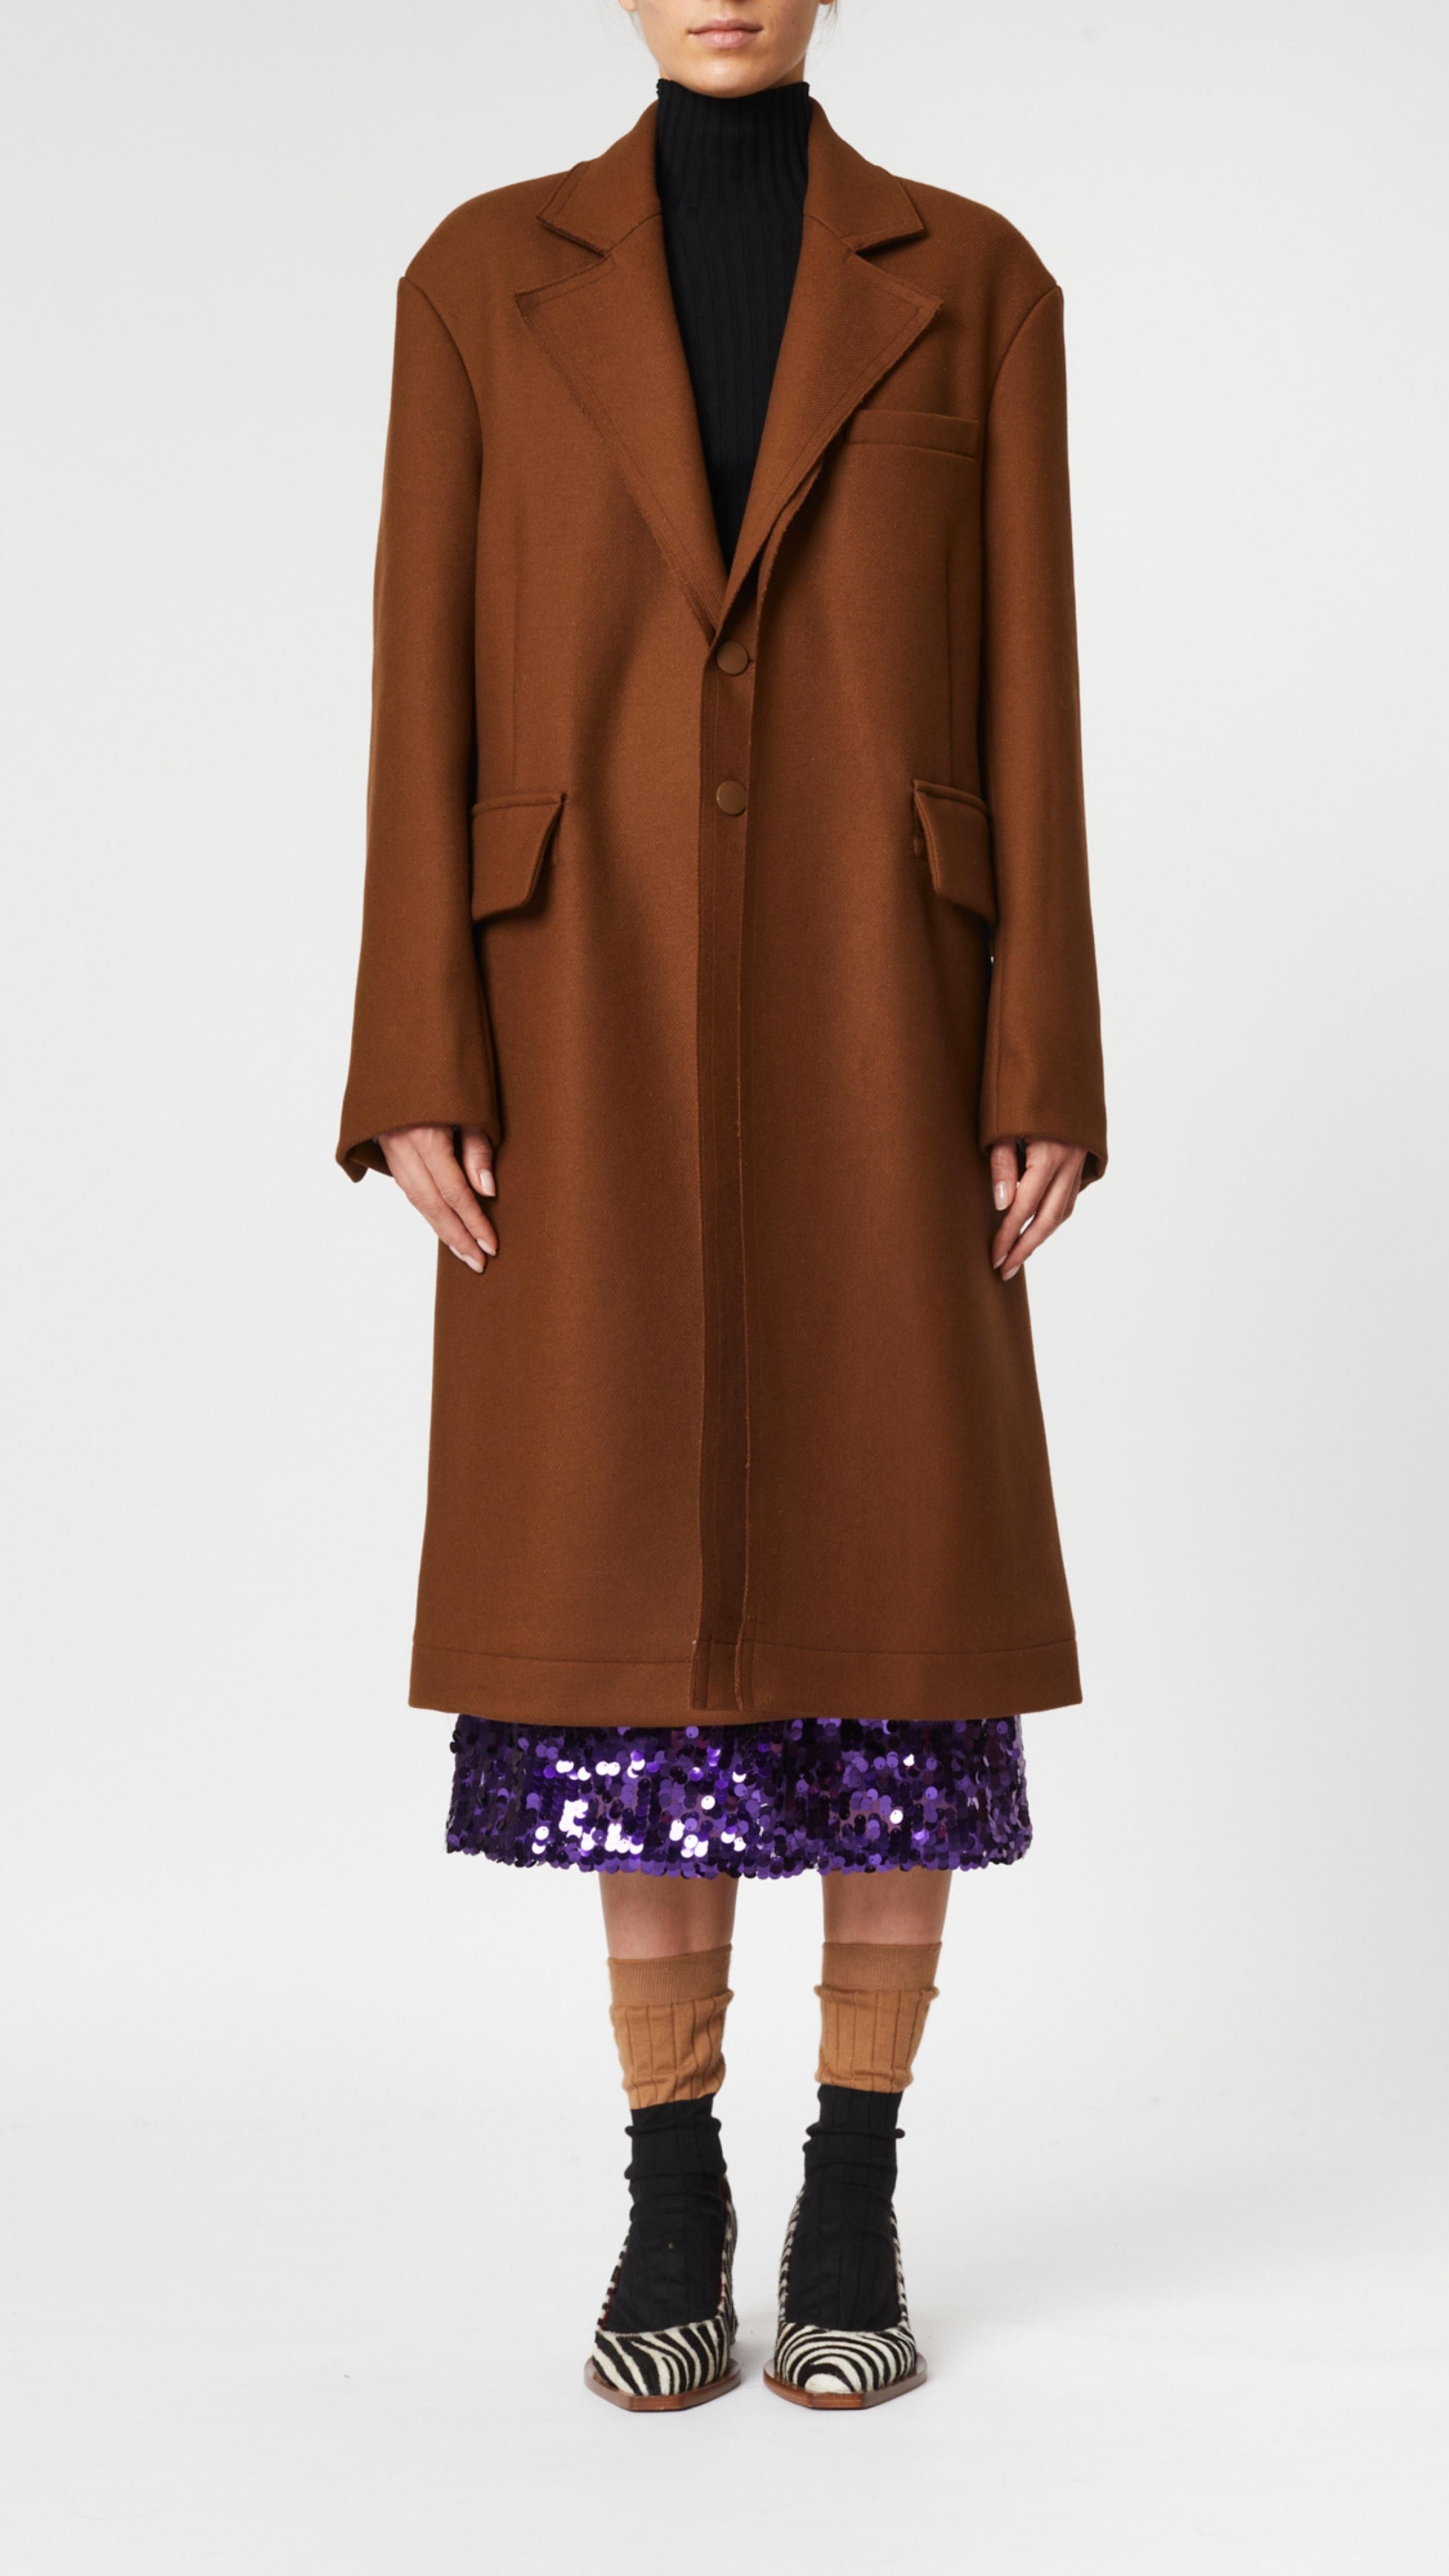 Plan C Chestnut Wool Overcoat. Classic but with a modern esthetic with coat jacket. Chestnut brown Italian wool with double layers. Midi length and long sleeves. Shown on model facing front.